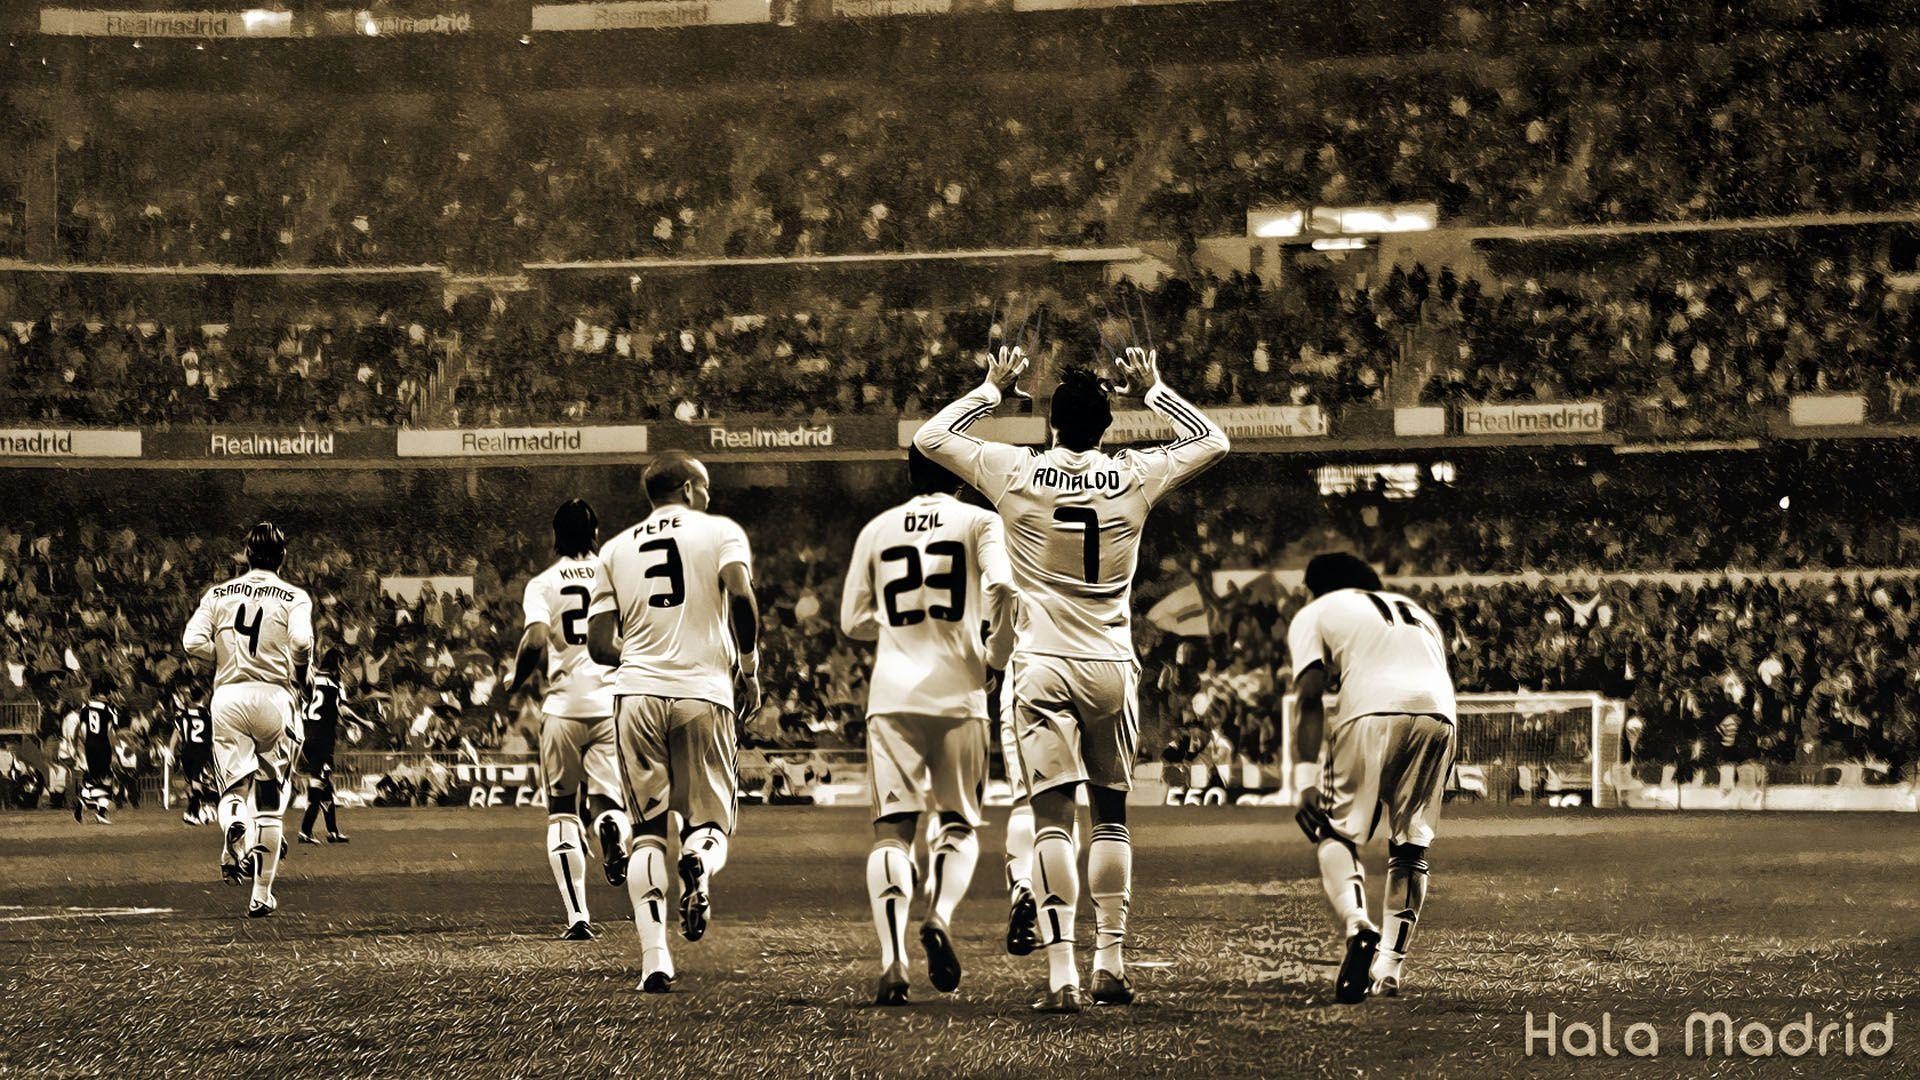 1920x1080 real madrid hd wallpapers